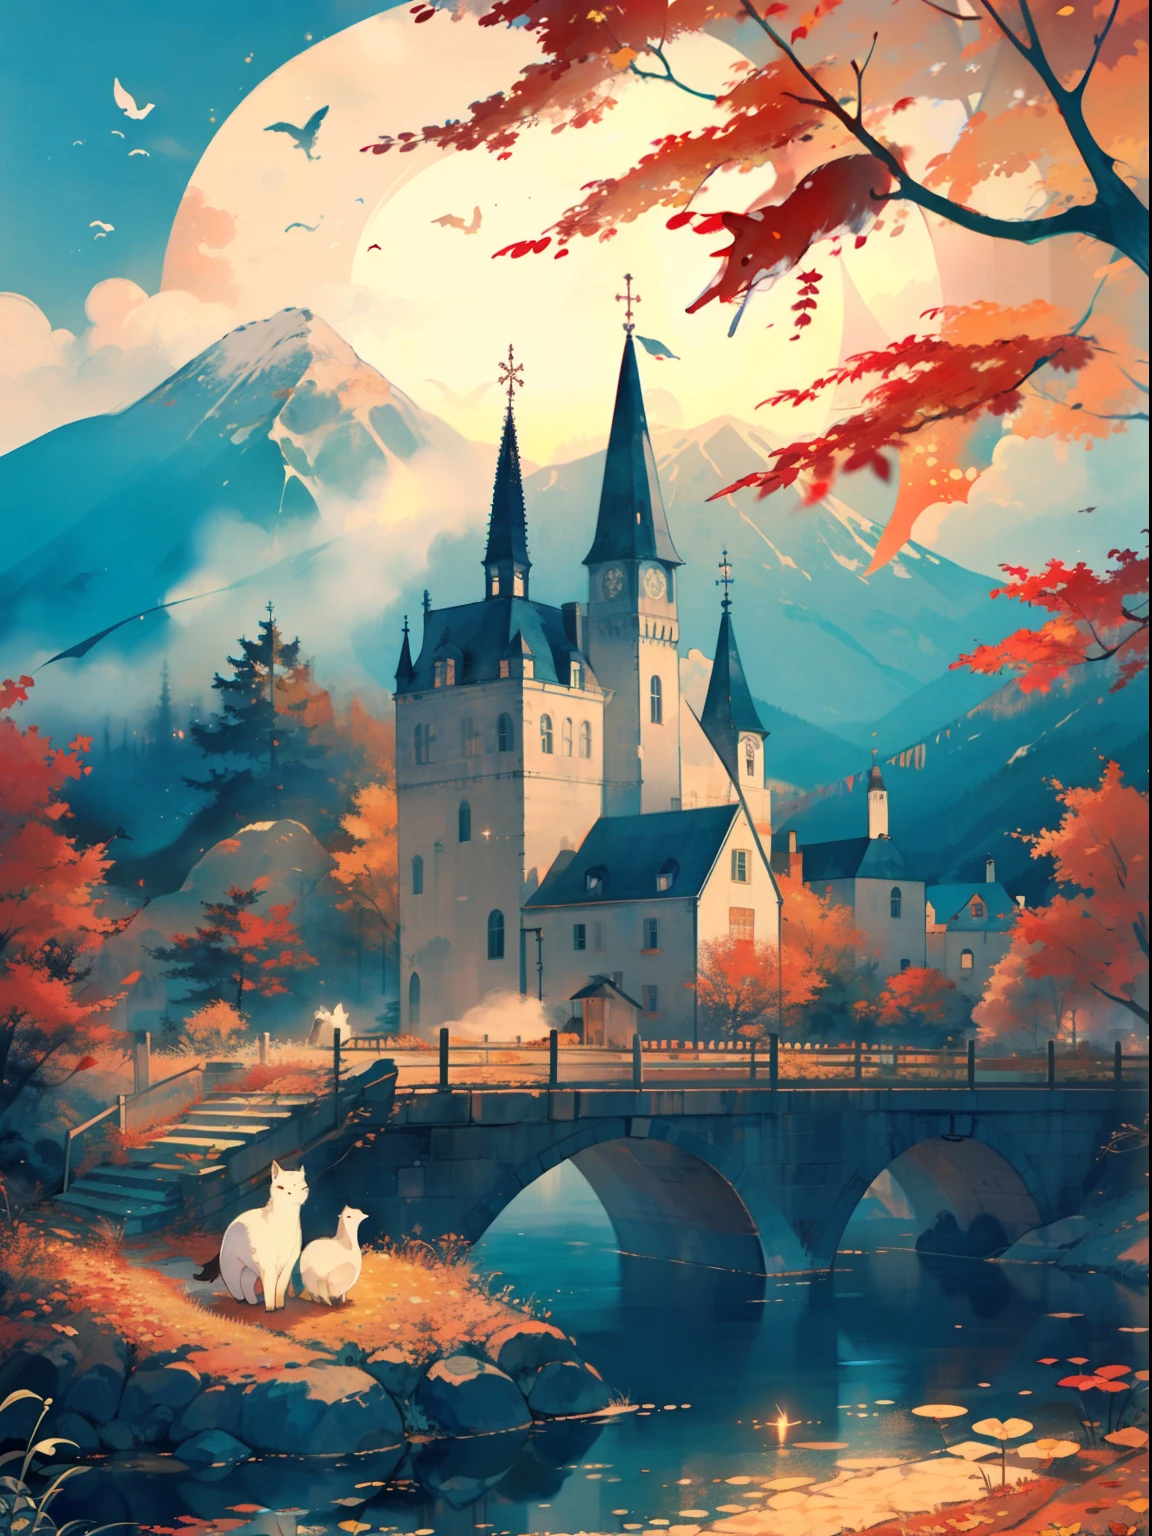 (((masterpiece))),best quality, whitetown, autumn scenery, 1man, warm color